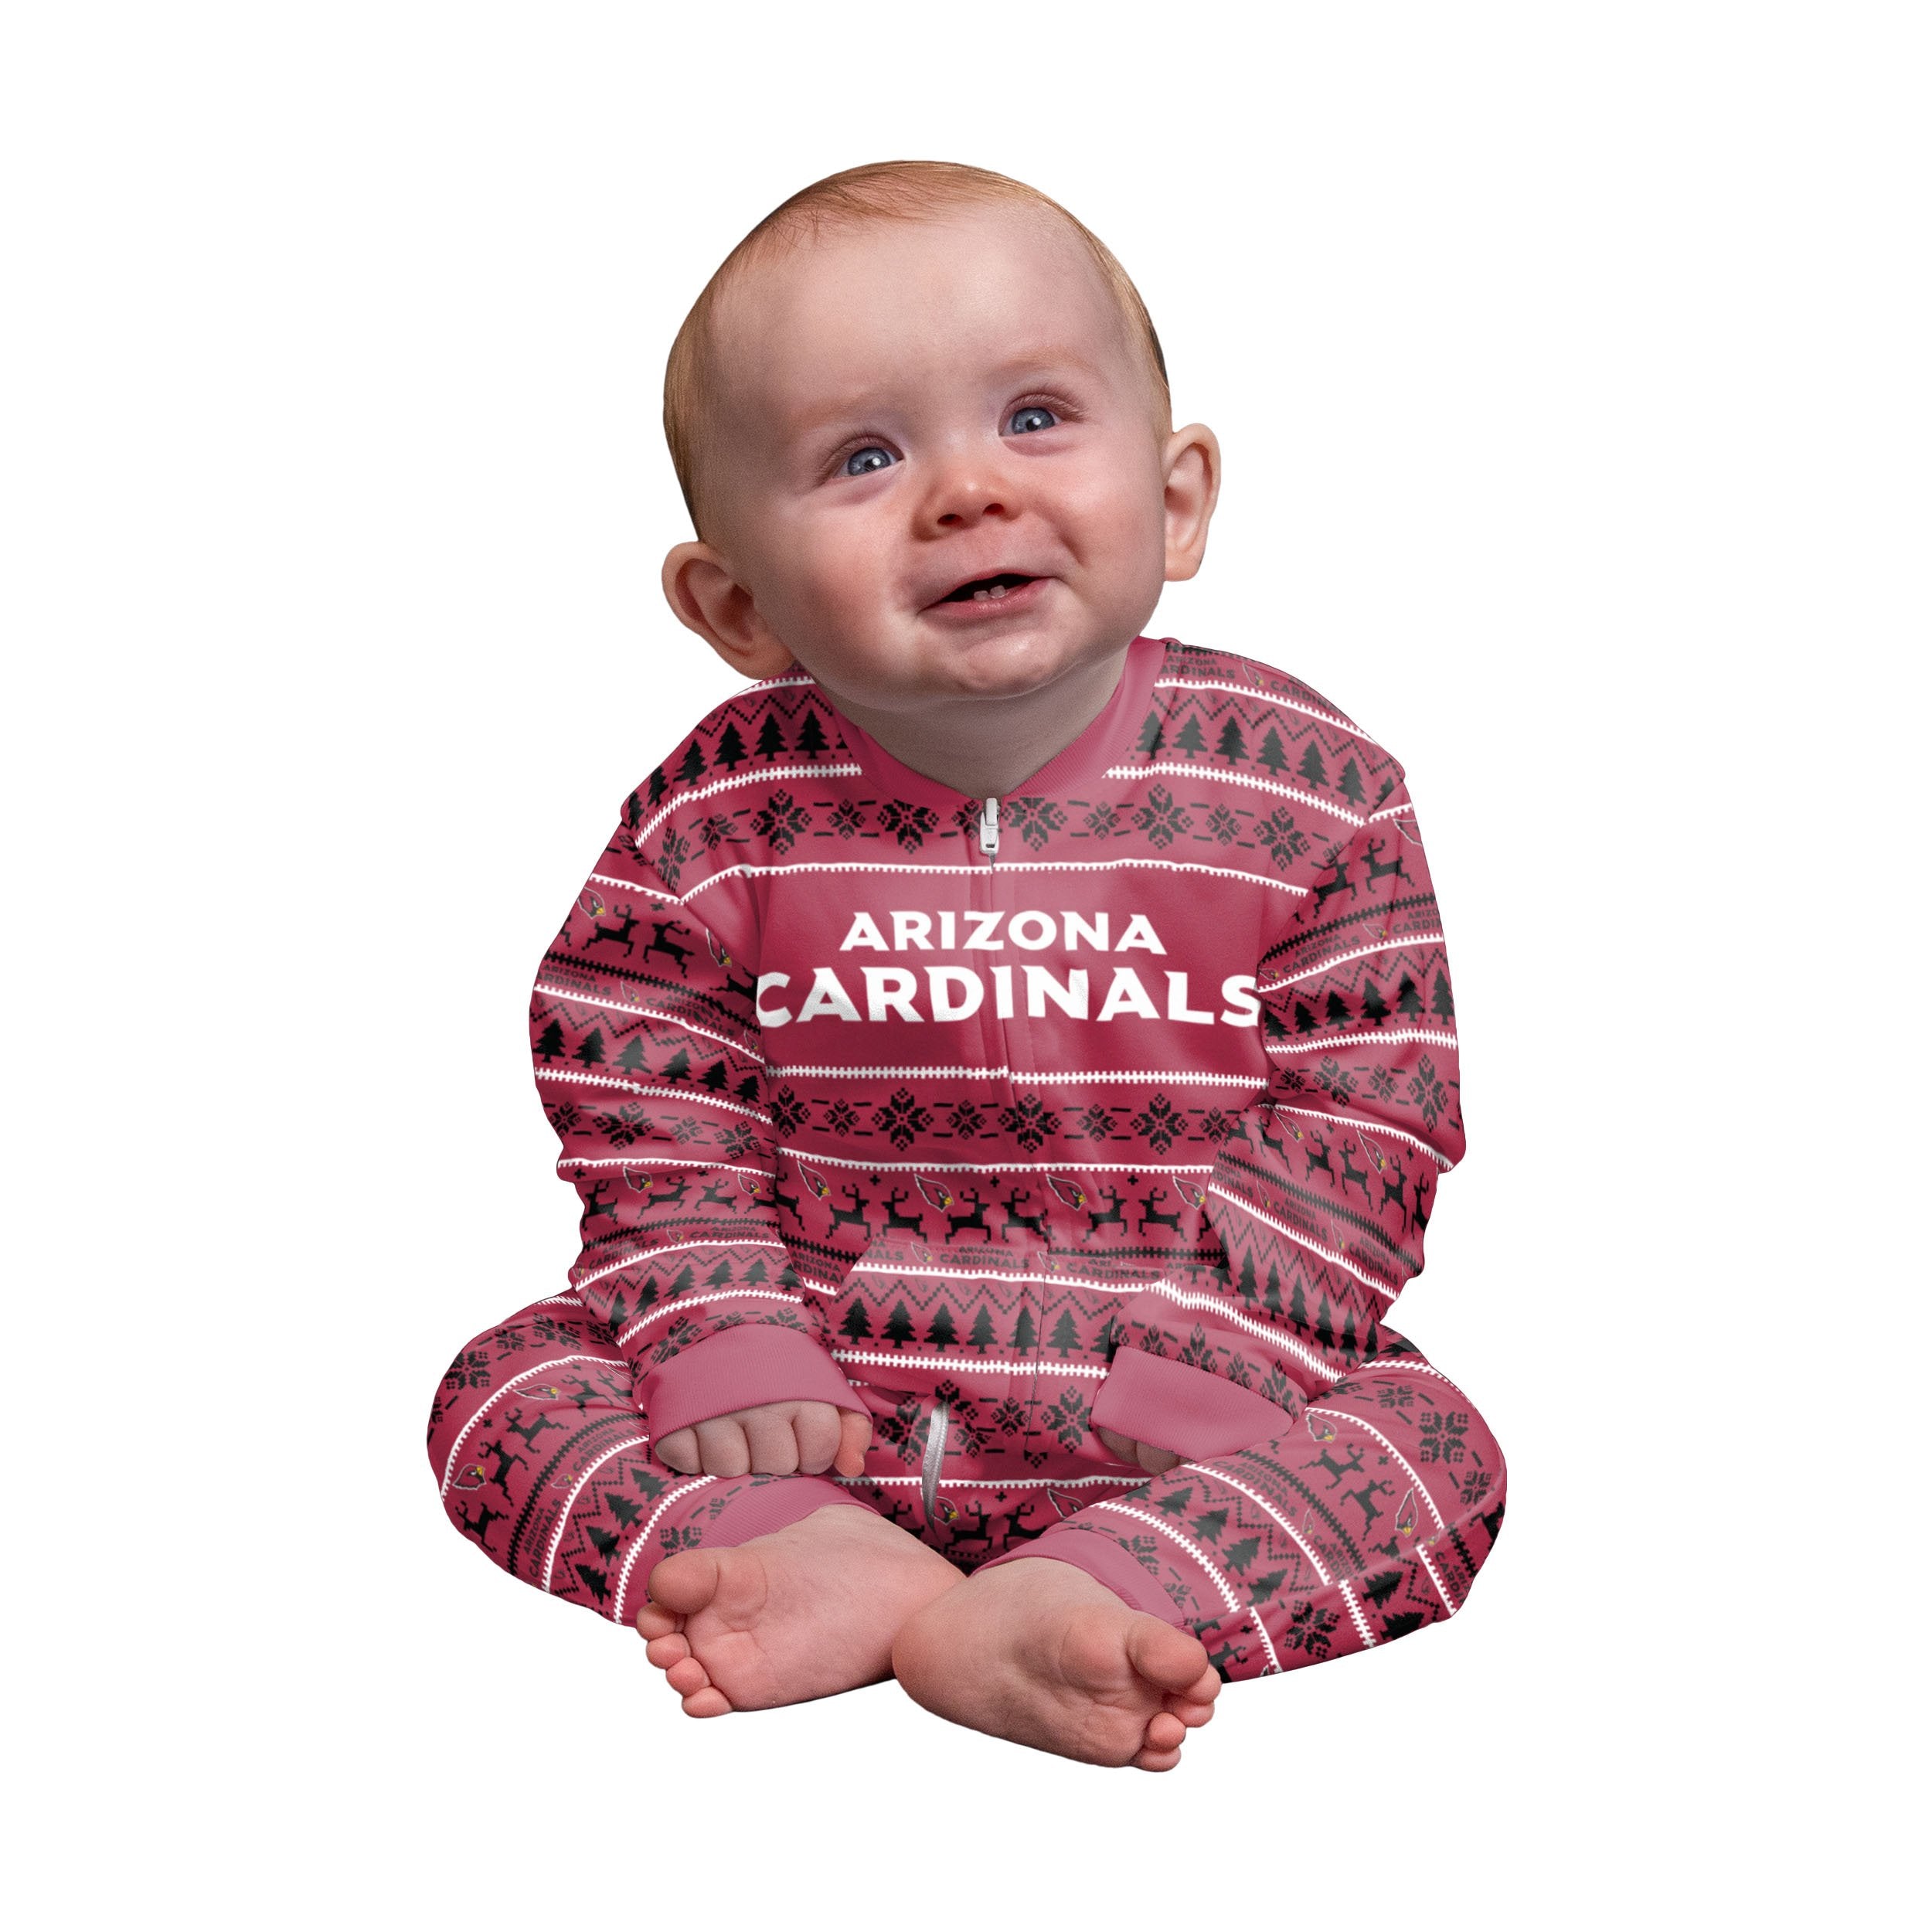 Louisville Cardinals Pajamas Set Personalized Name For Sport Fans Christmas  Pajamas Set For Family